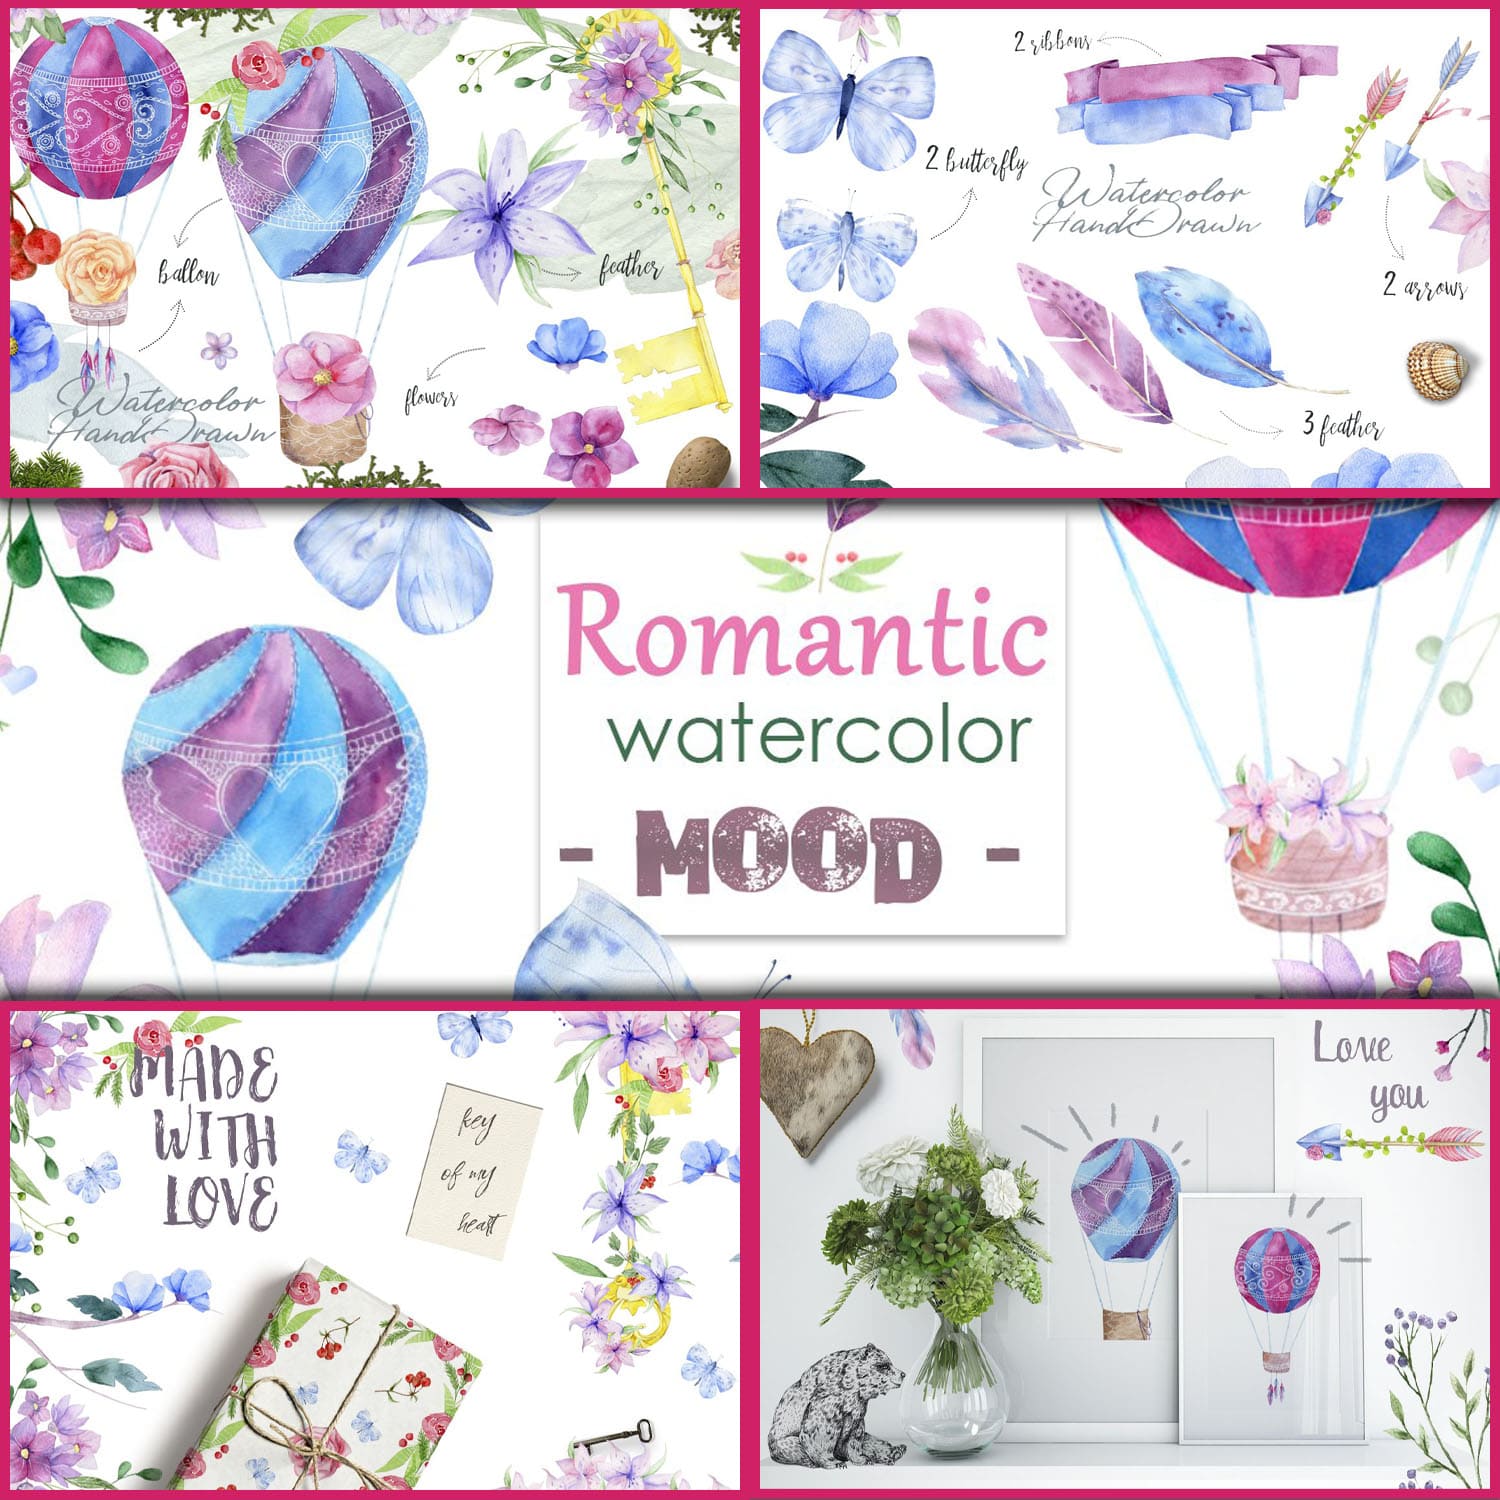 Several patterns with a romantic watercolor design.